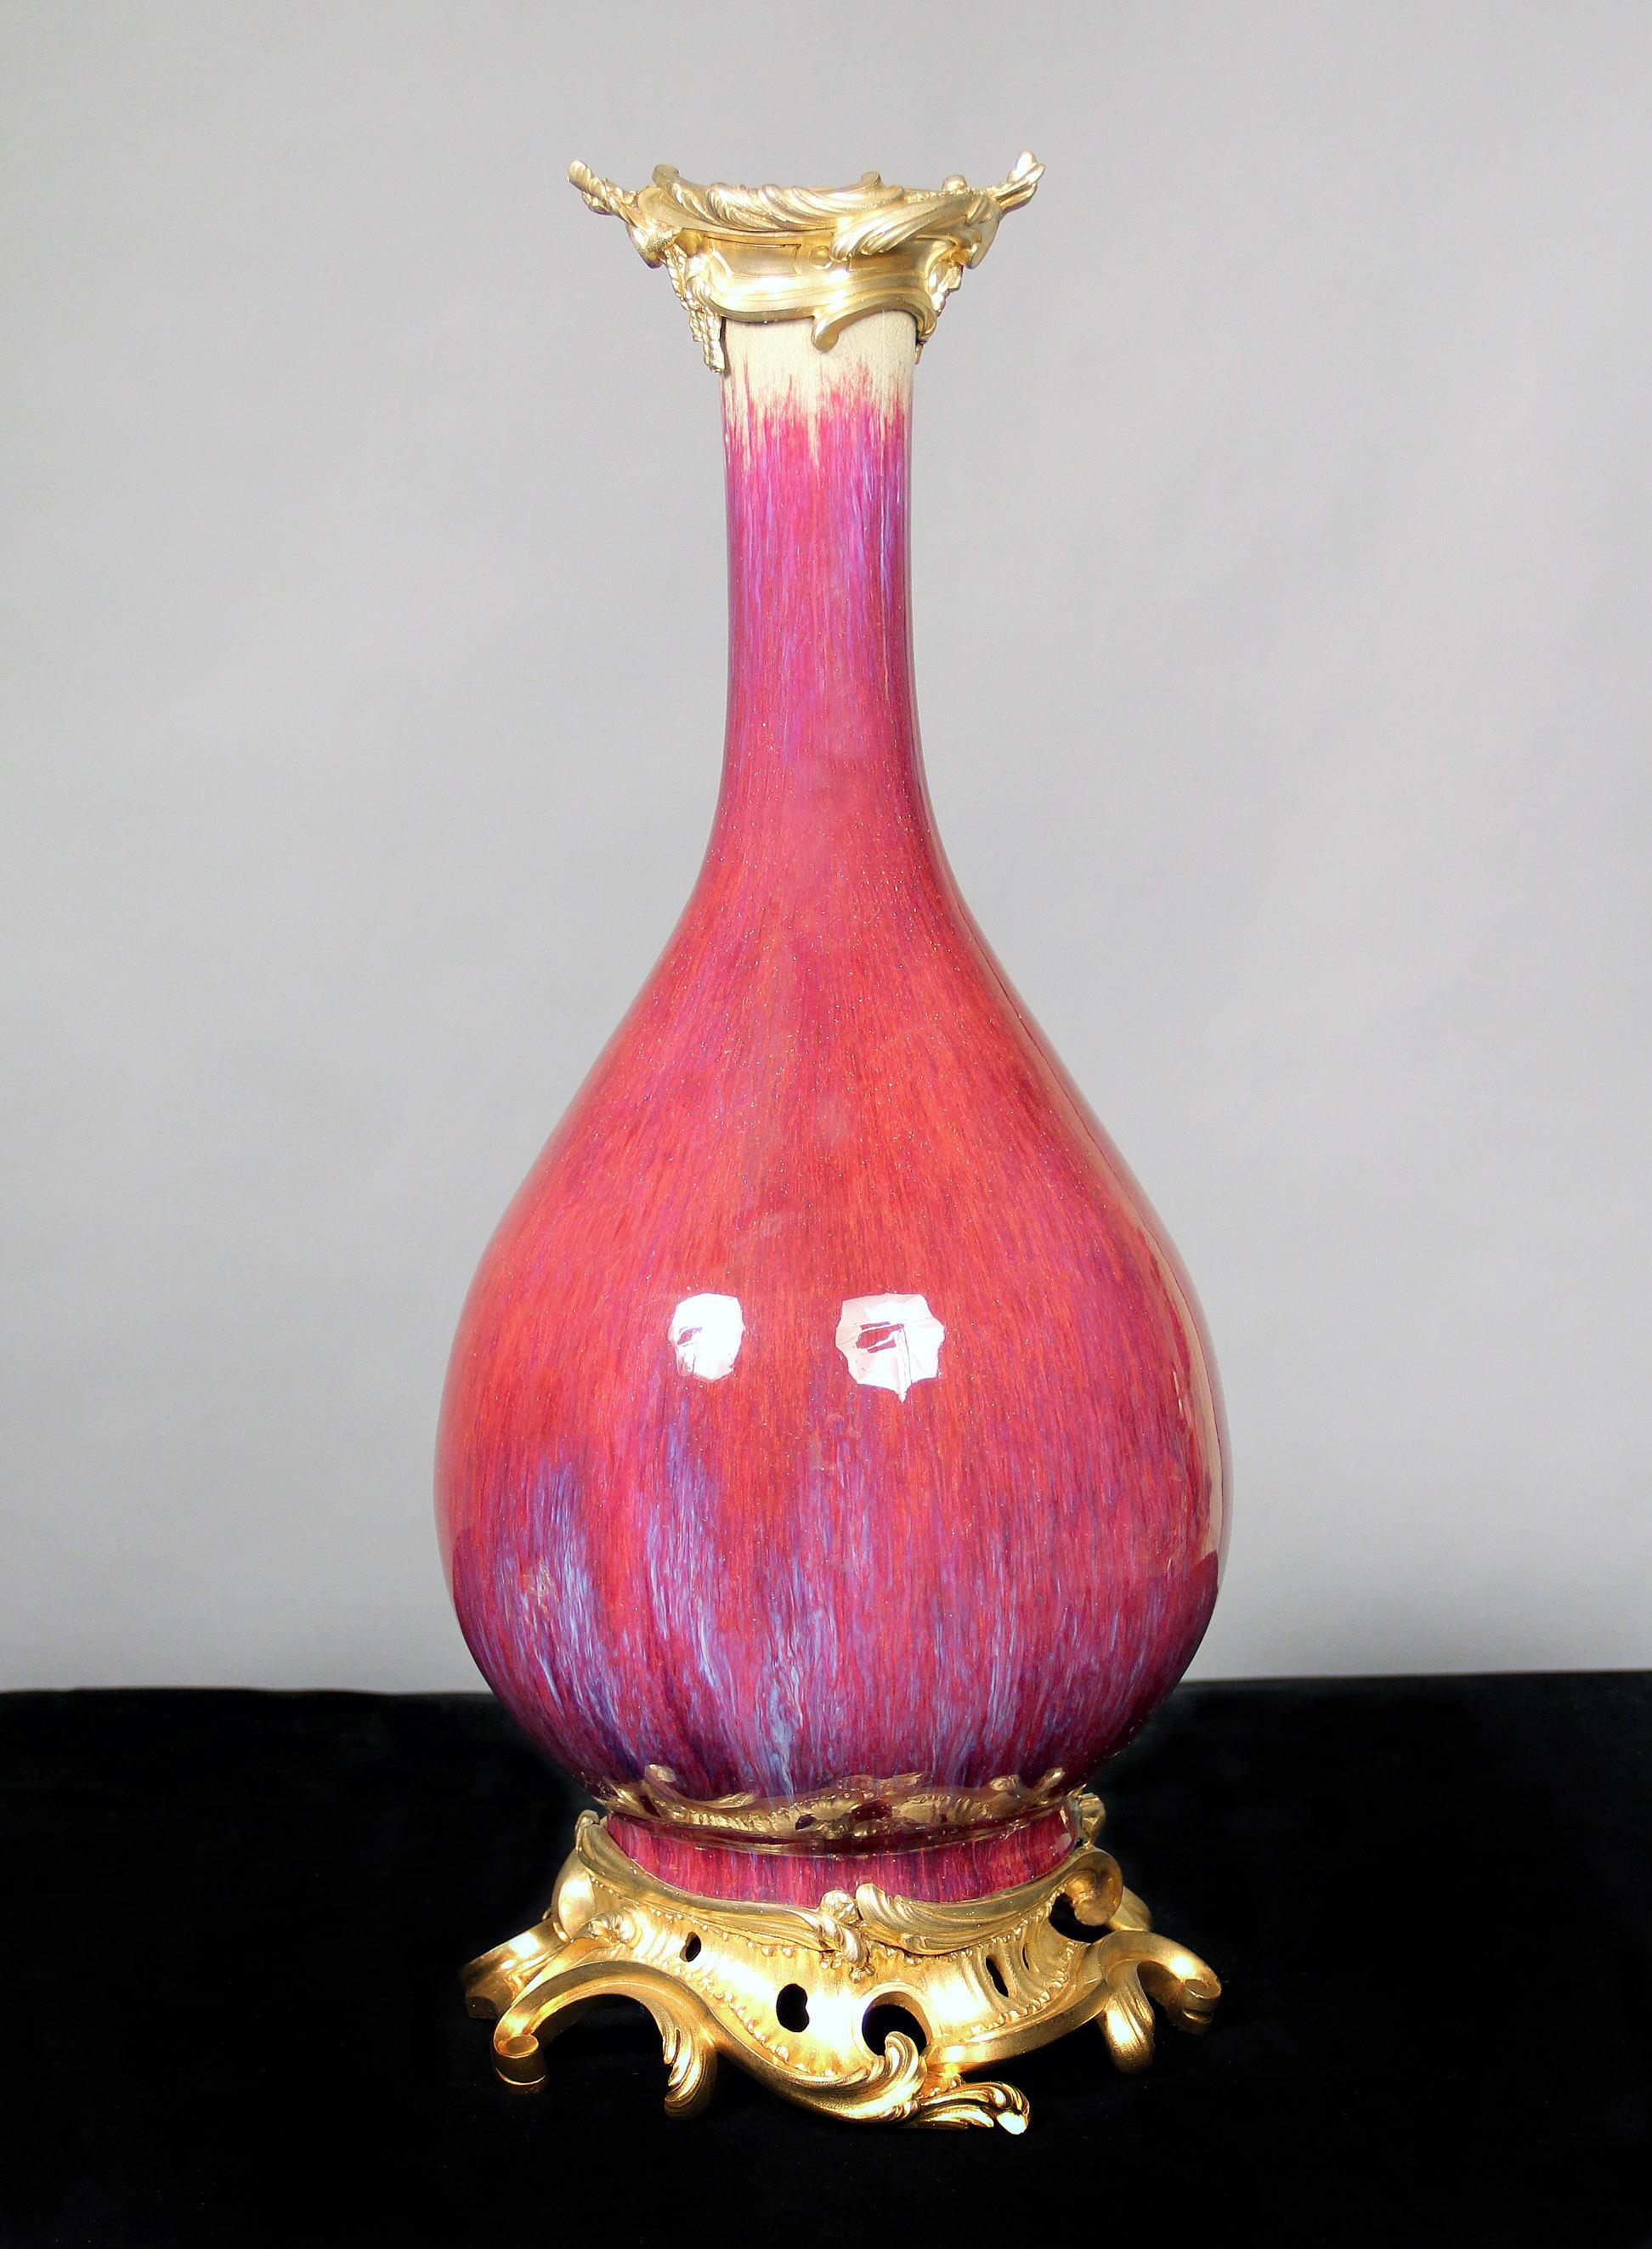 Lovely “Sang de Boeuf” French porcelain with gilt bronze tops and sitting on a designed gilt bronze stand.

Sang de Boeuf, also called flambé glaze, a glossy, rich, bloodred glaze often slashed with streaks of purple or turquoise used to decorate